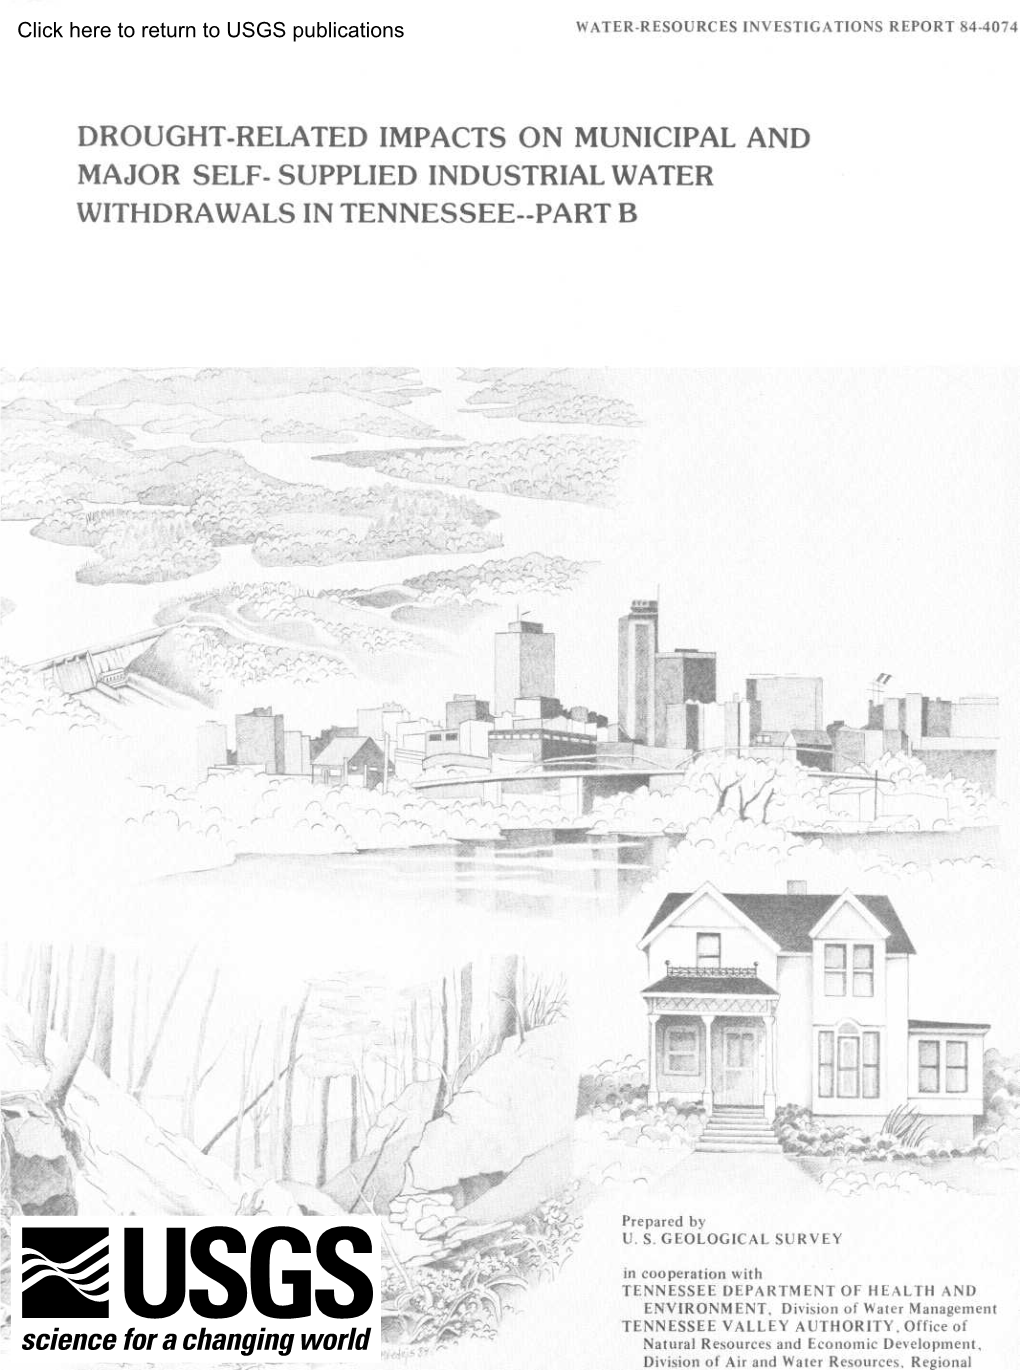 Supplied Industrial Water Withdrawals in Tennessee--Part B